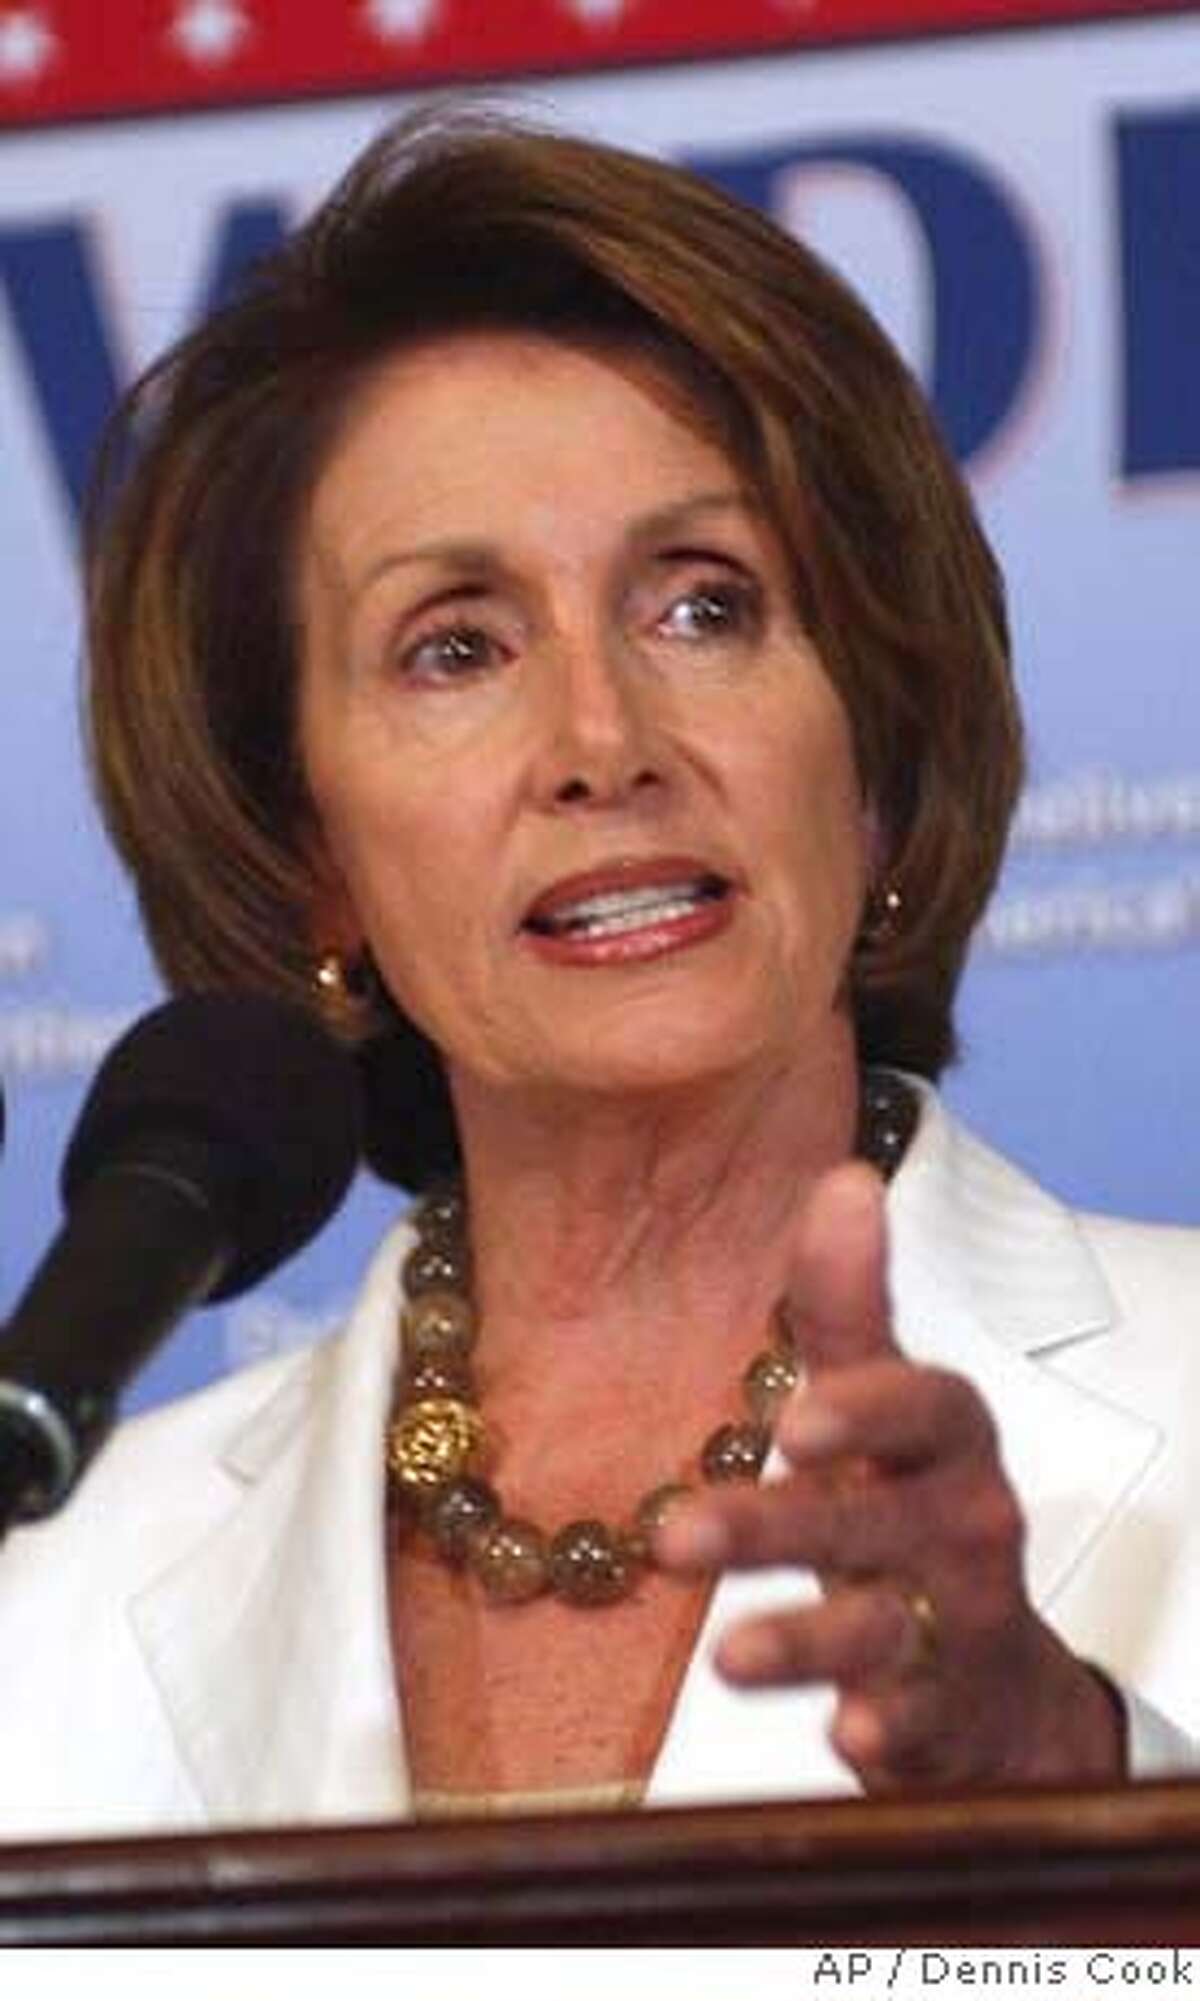 House Speaker Nancy Pelosi of Calif., gestures during a news conference on Capitol Hill in Washington, Friday, Aug. 3, 2007. (AP Photo/Dennis Cook)